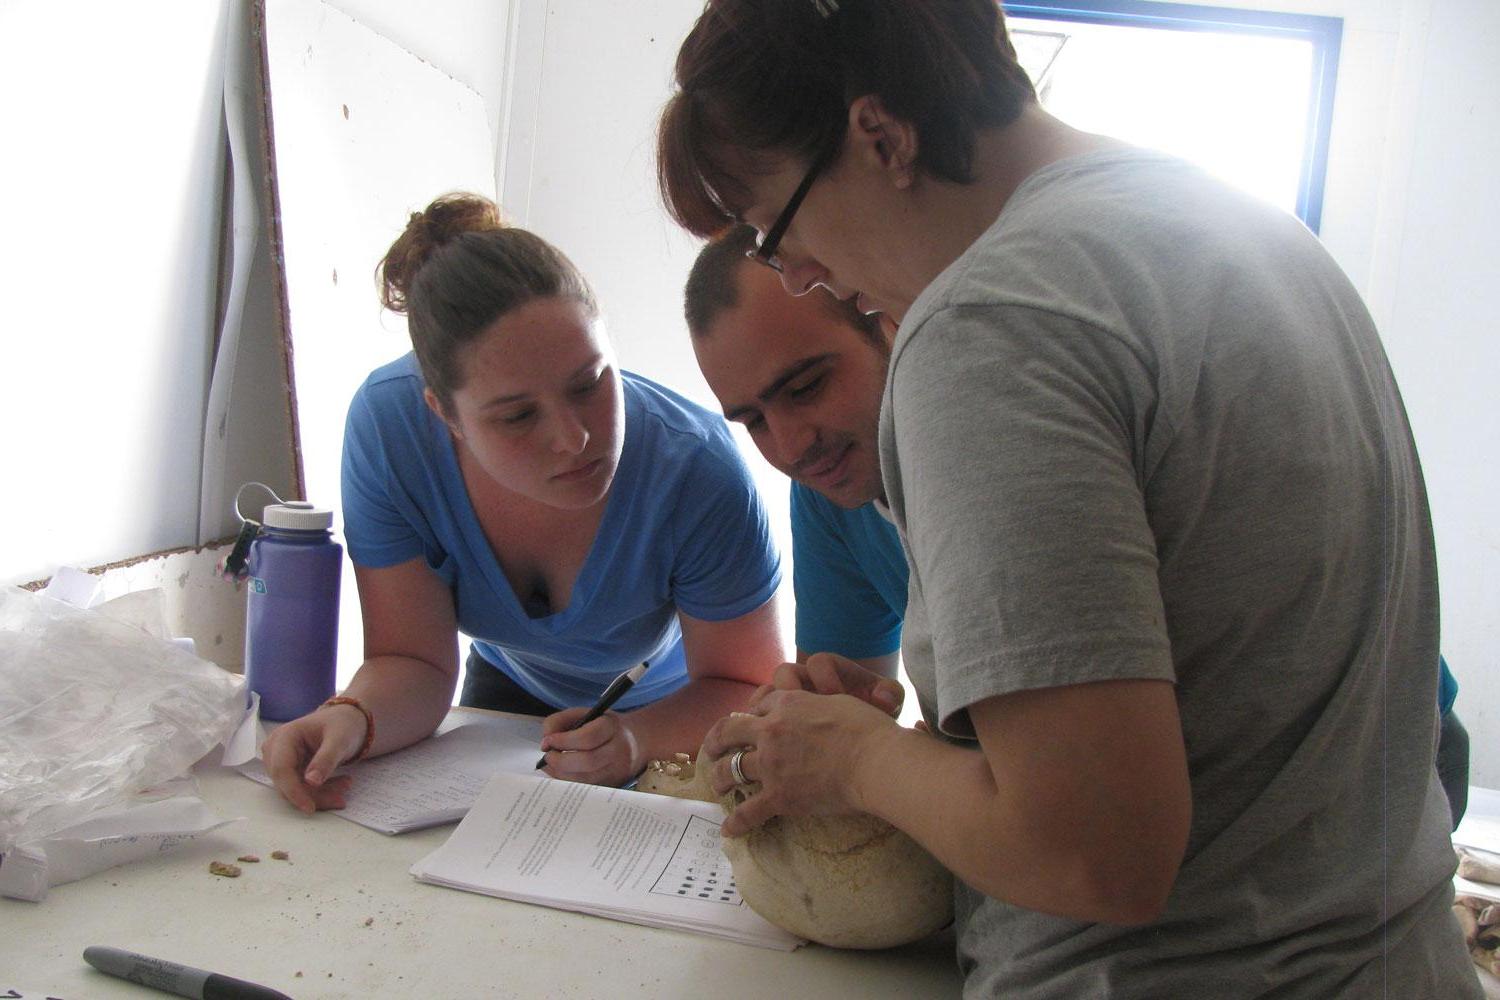 UNC students Jennifer Wright and Katelyn McEachern work with Albanian student Marlon to analyze skeletons in Albania.